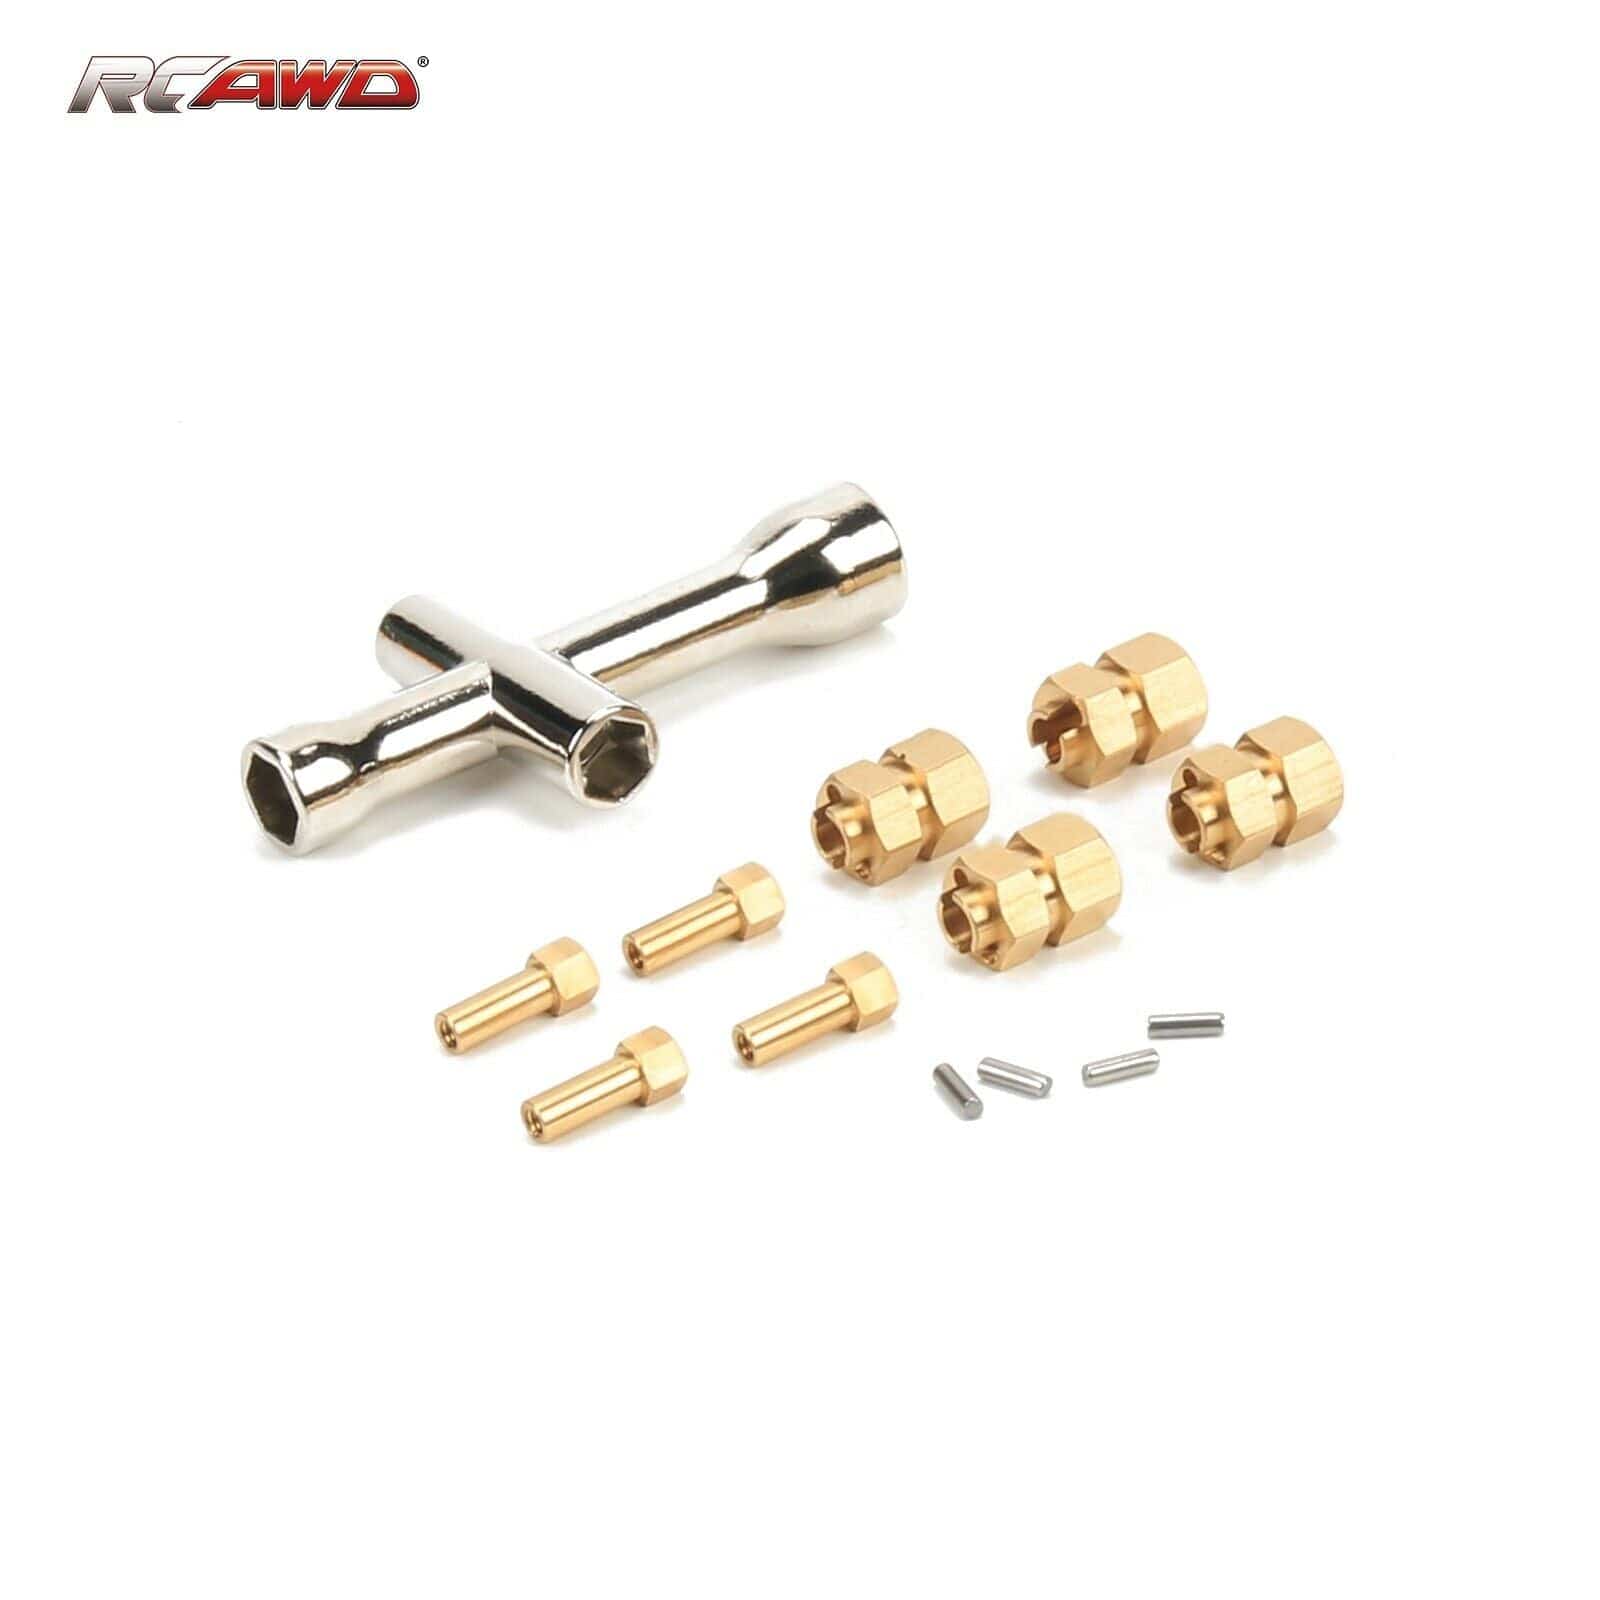 RCAWD Axial Counterweight Brass H7*9.5mm Wheel Hex Hub for scx24 ax24 Crawlers - RCAWD